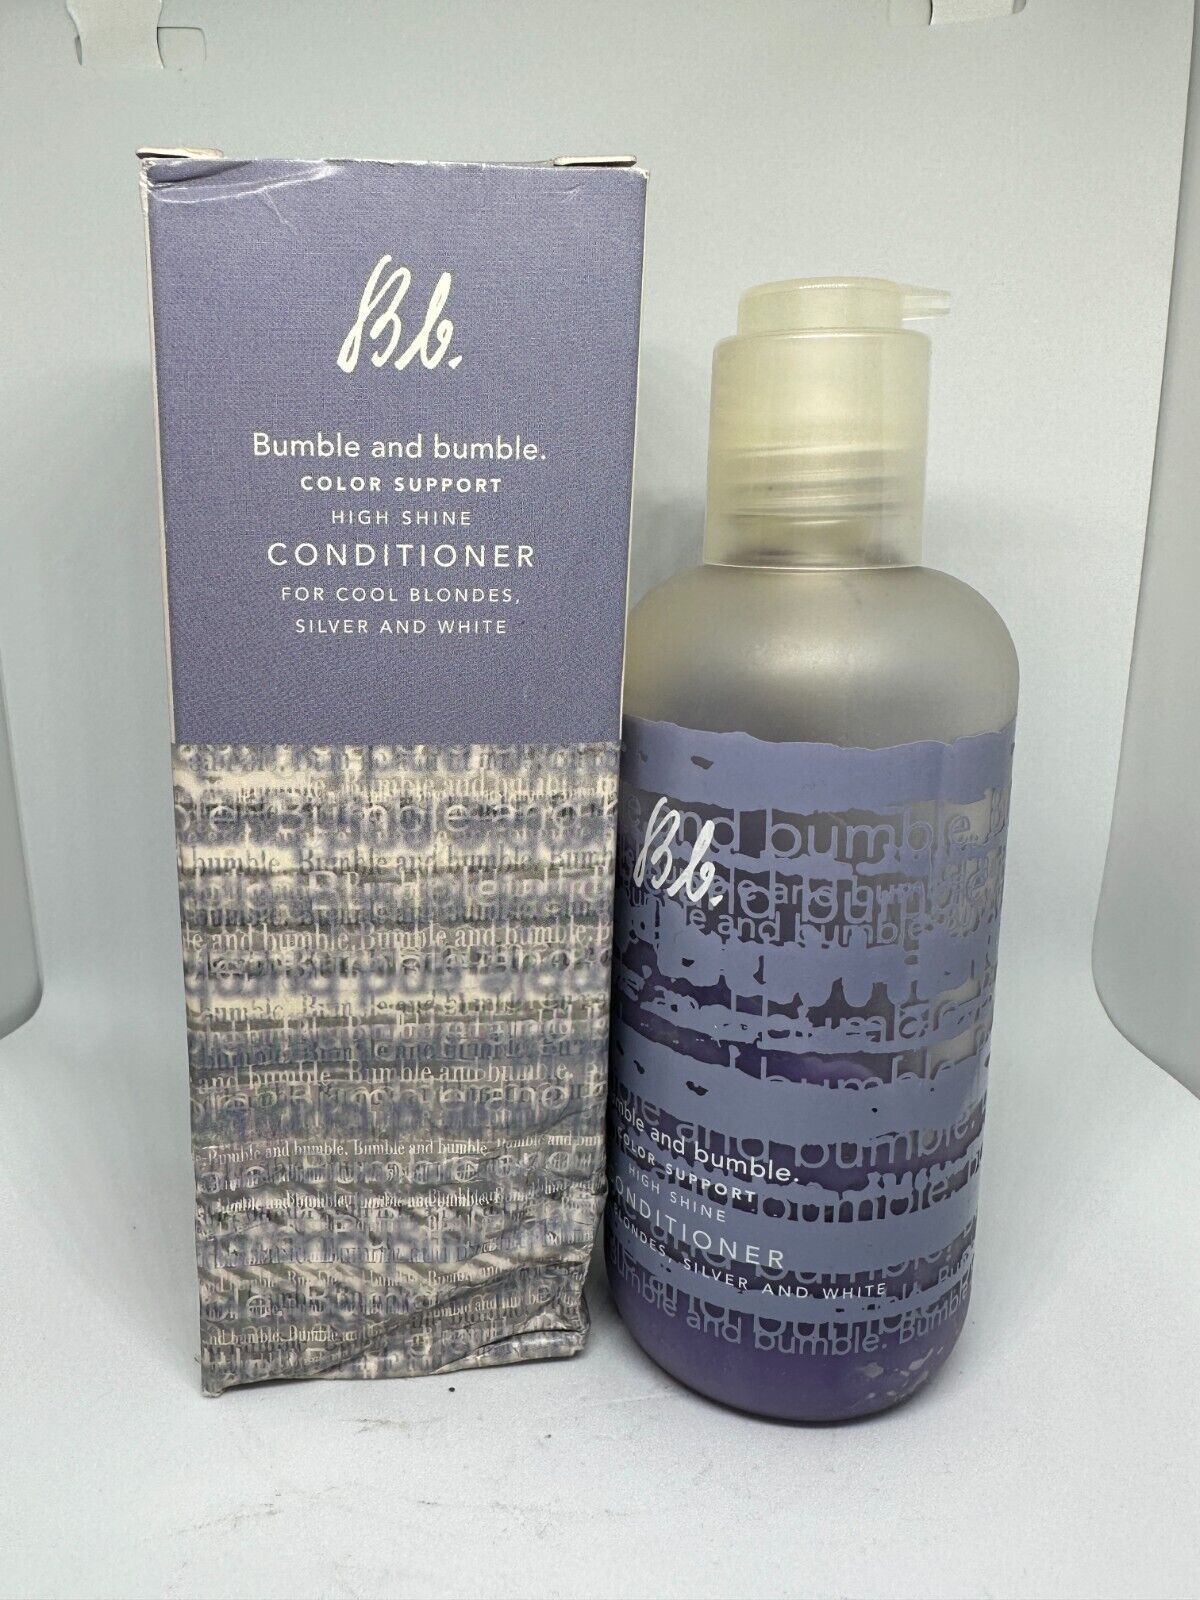 Bumble and Bumble Color Support High Shine Conditioner For Cool Blondes 8 fl oz - $49.99